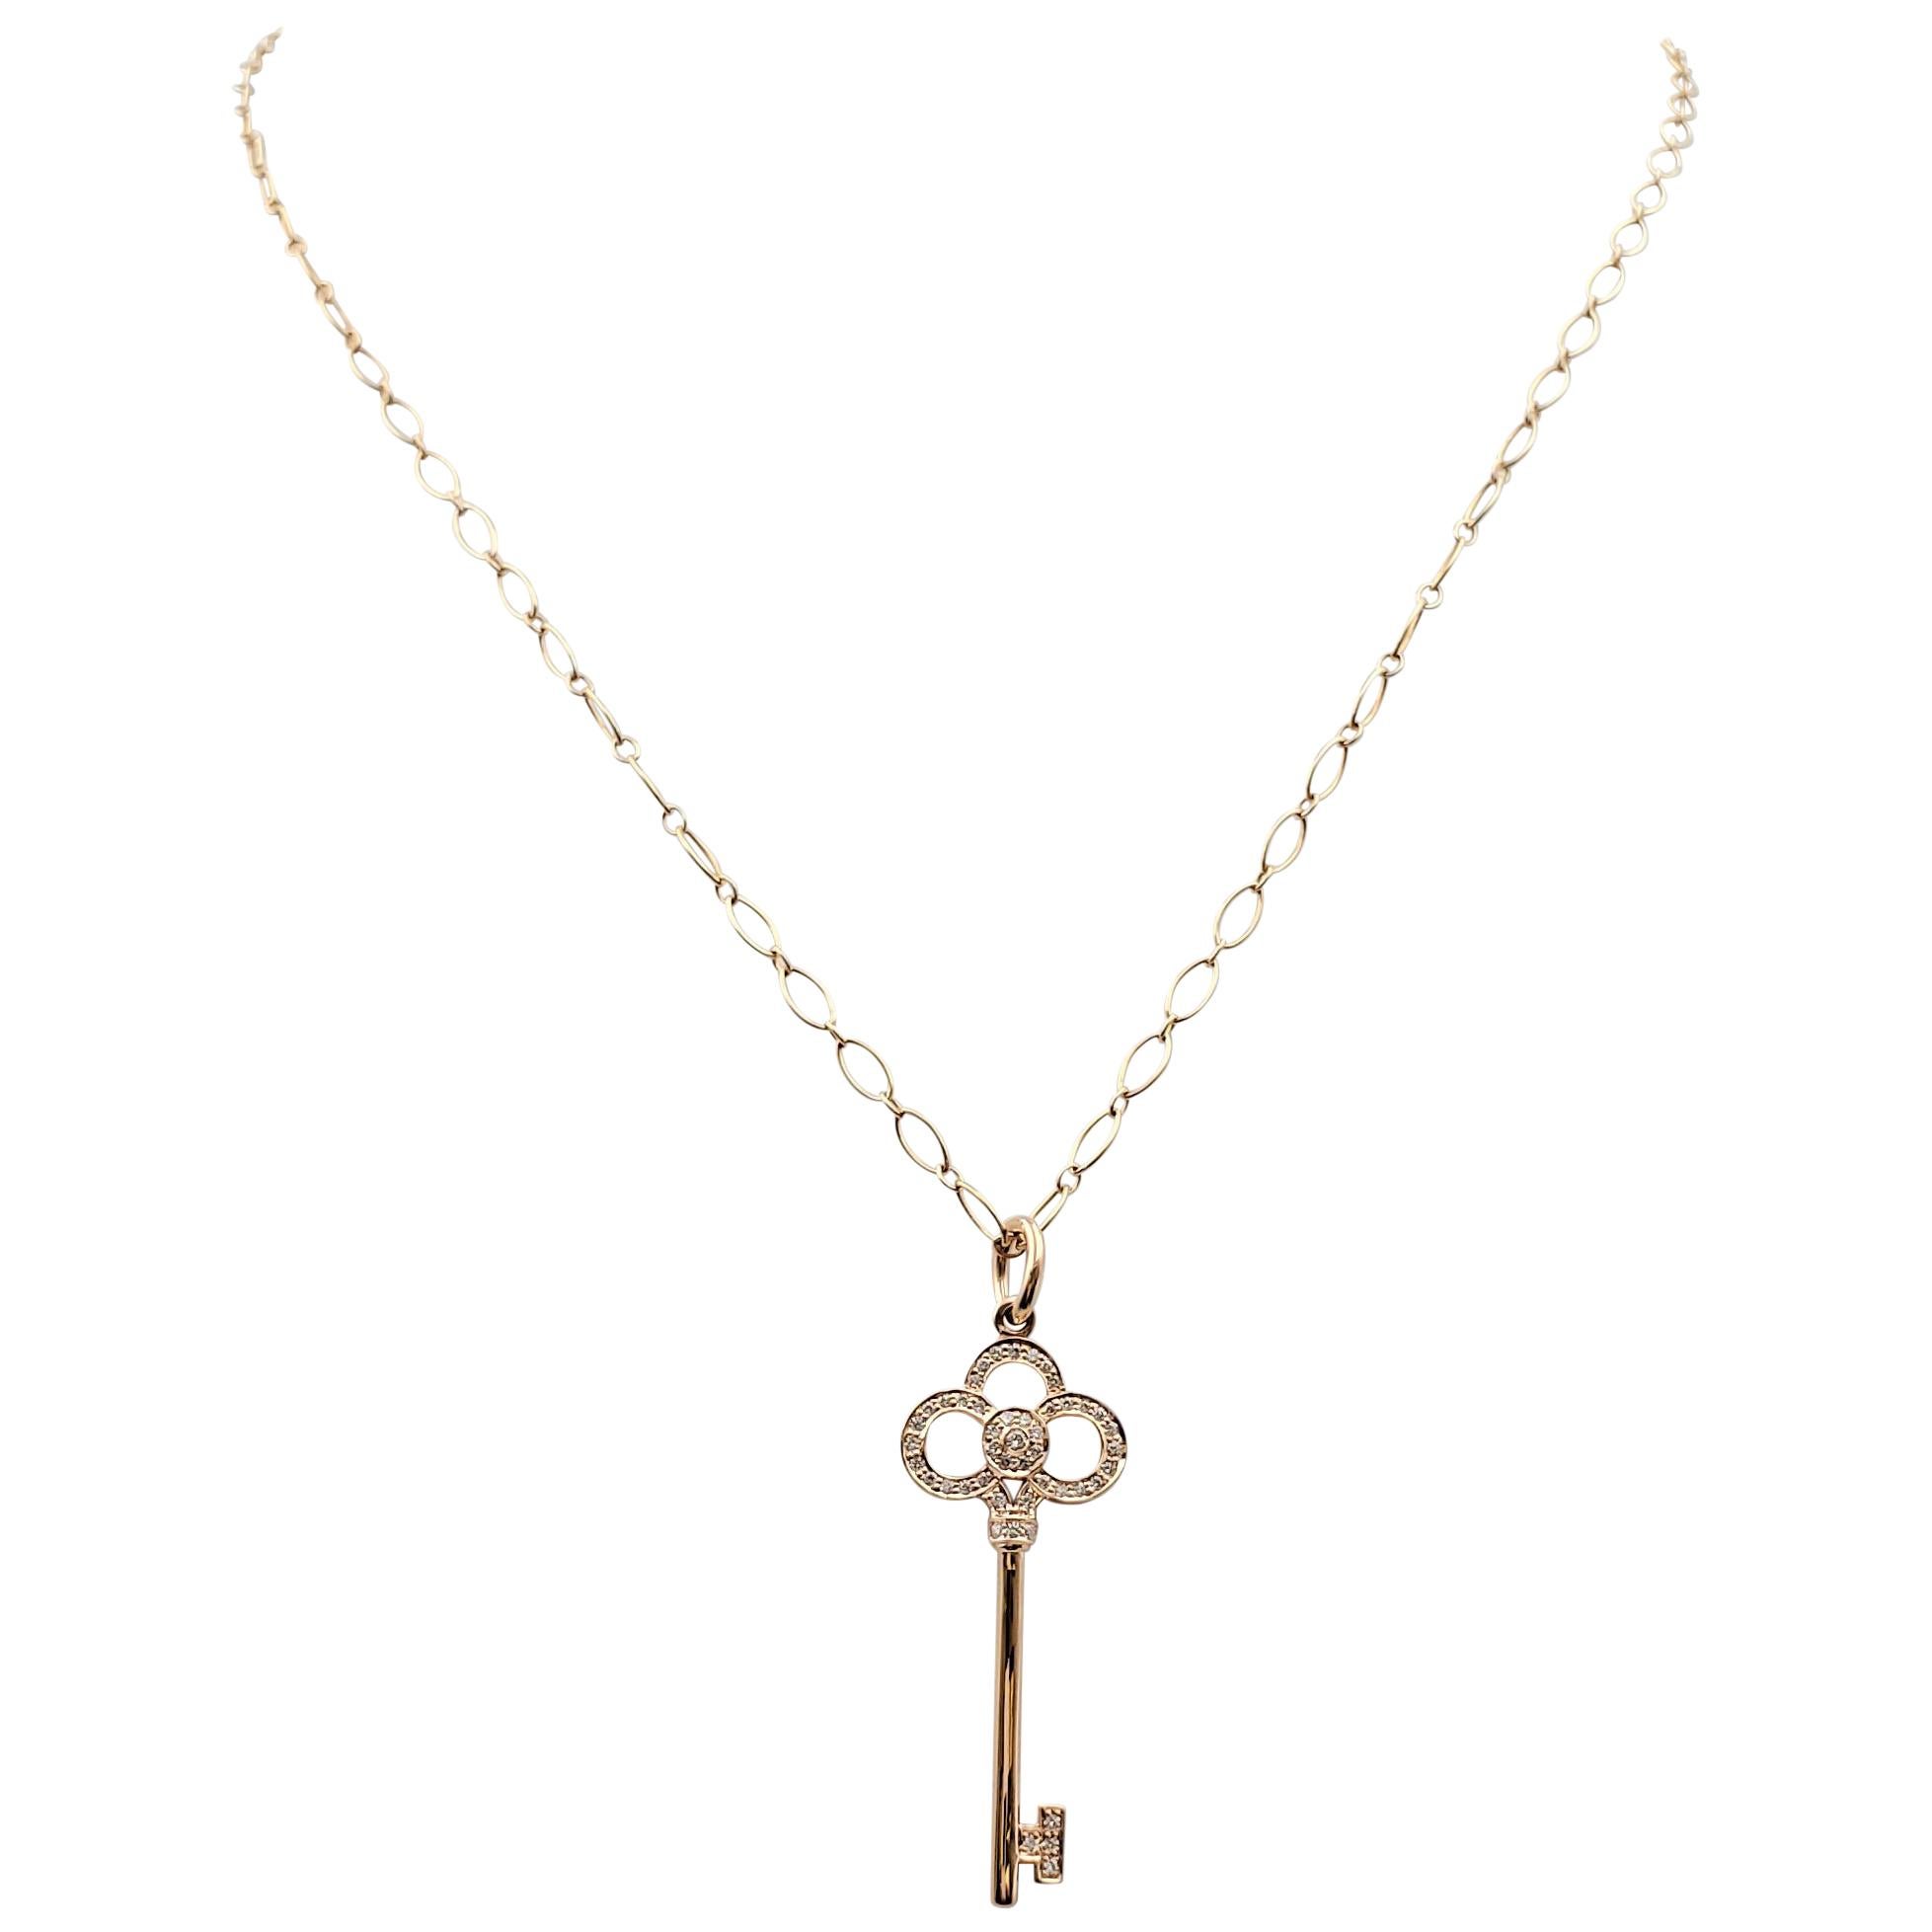 Tiffany & Co. Rose Gold and Diamond 'Crown Key' Pendant Necklace